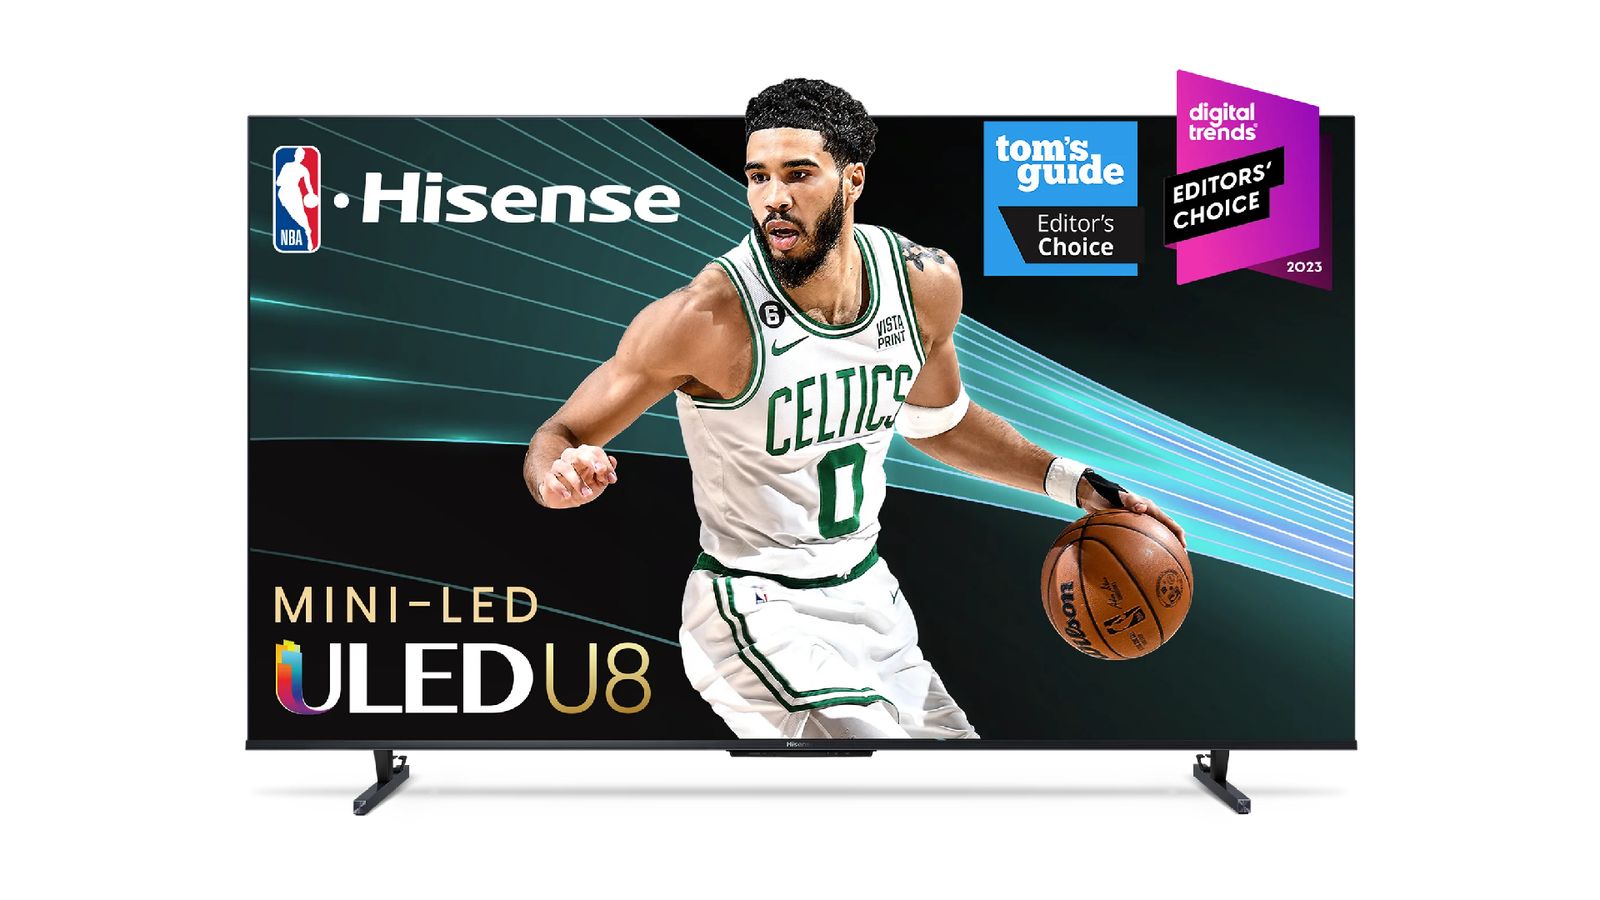 Hisense U8 product image of a black TV featuring an image of Jayson Tatum in a white Celtics jersey on the display.